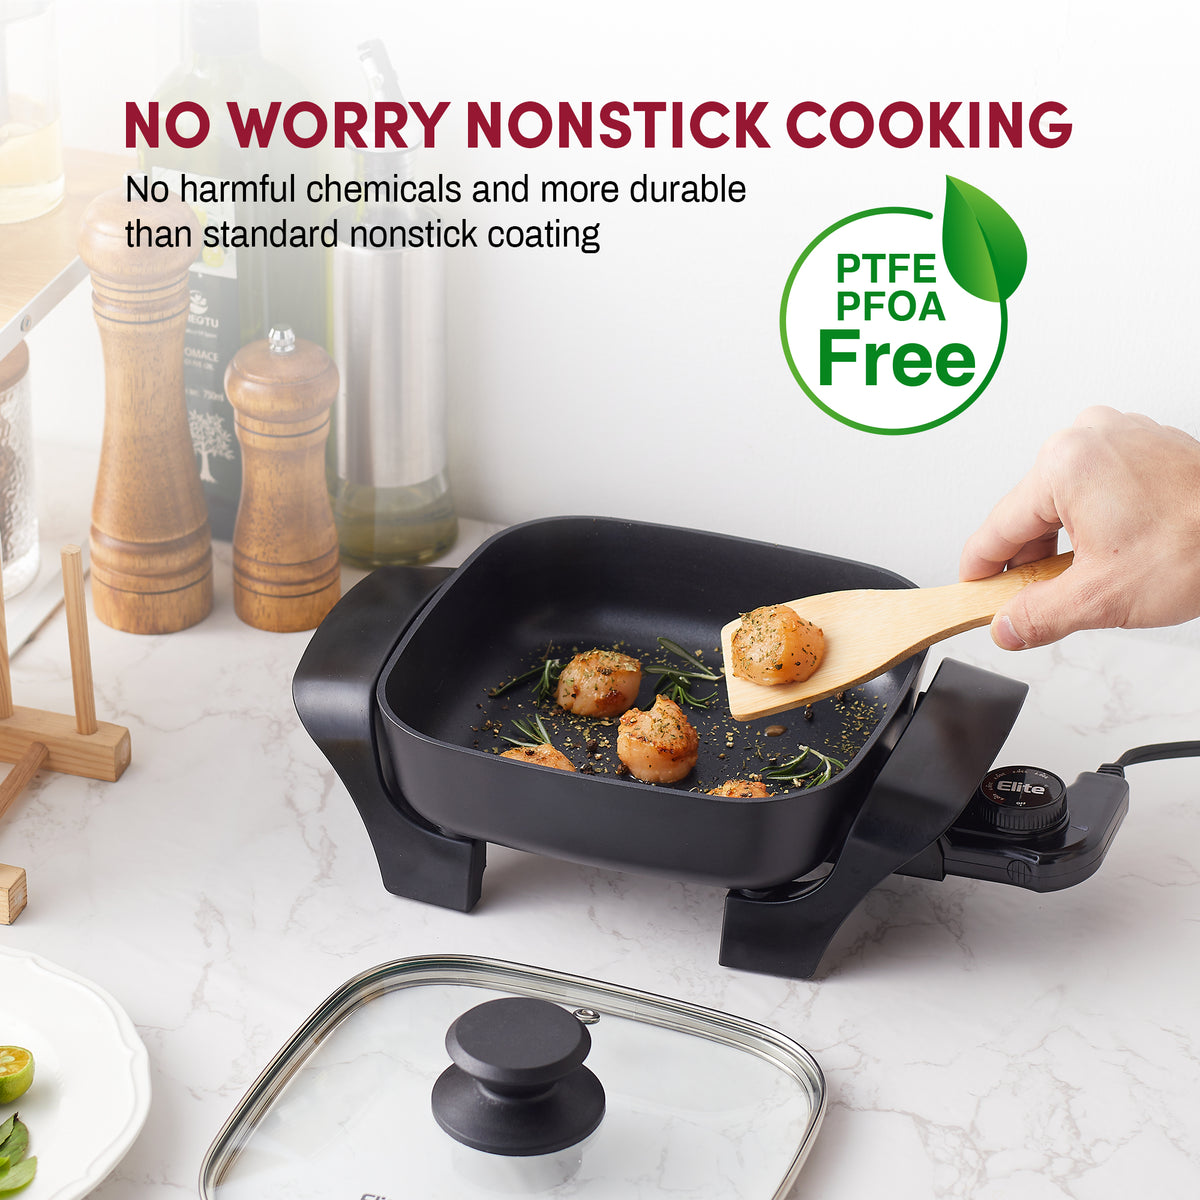 The 10 Cordless Electric Skillets Made Convenient for Cooking Indoor and  Outdoor - Economical Chef